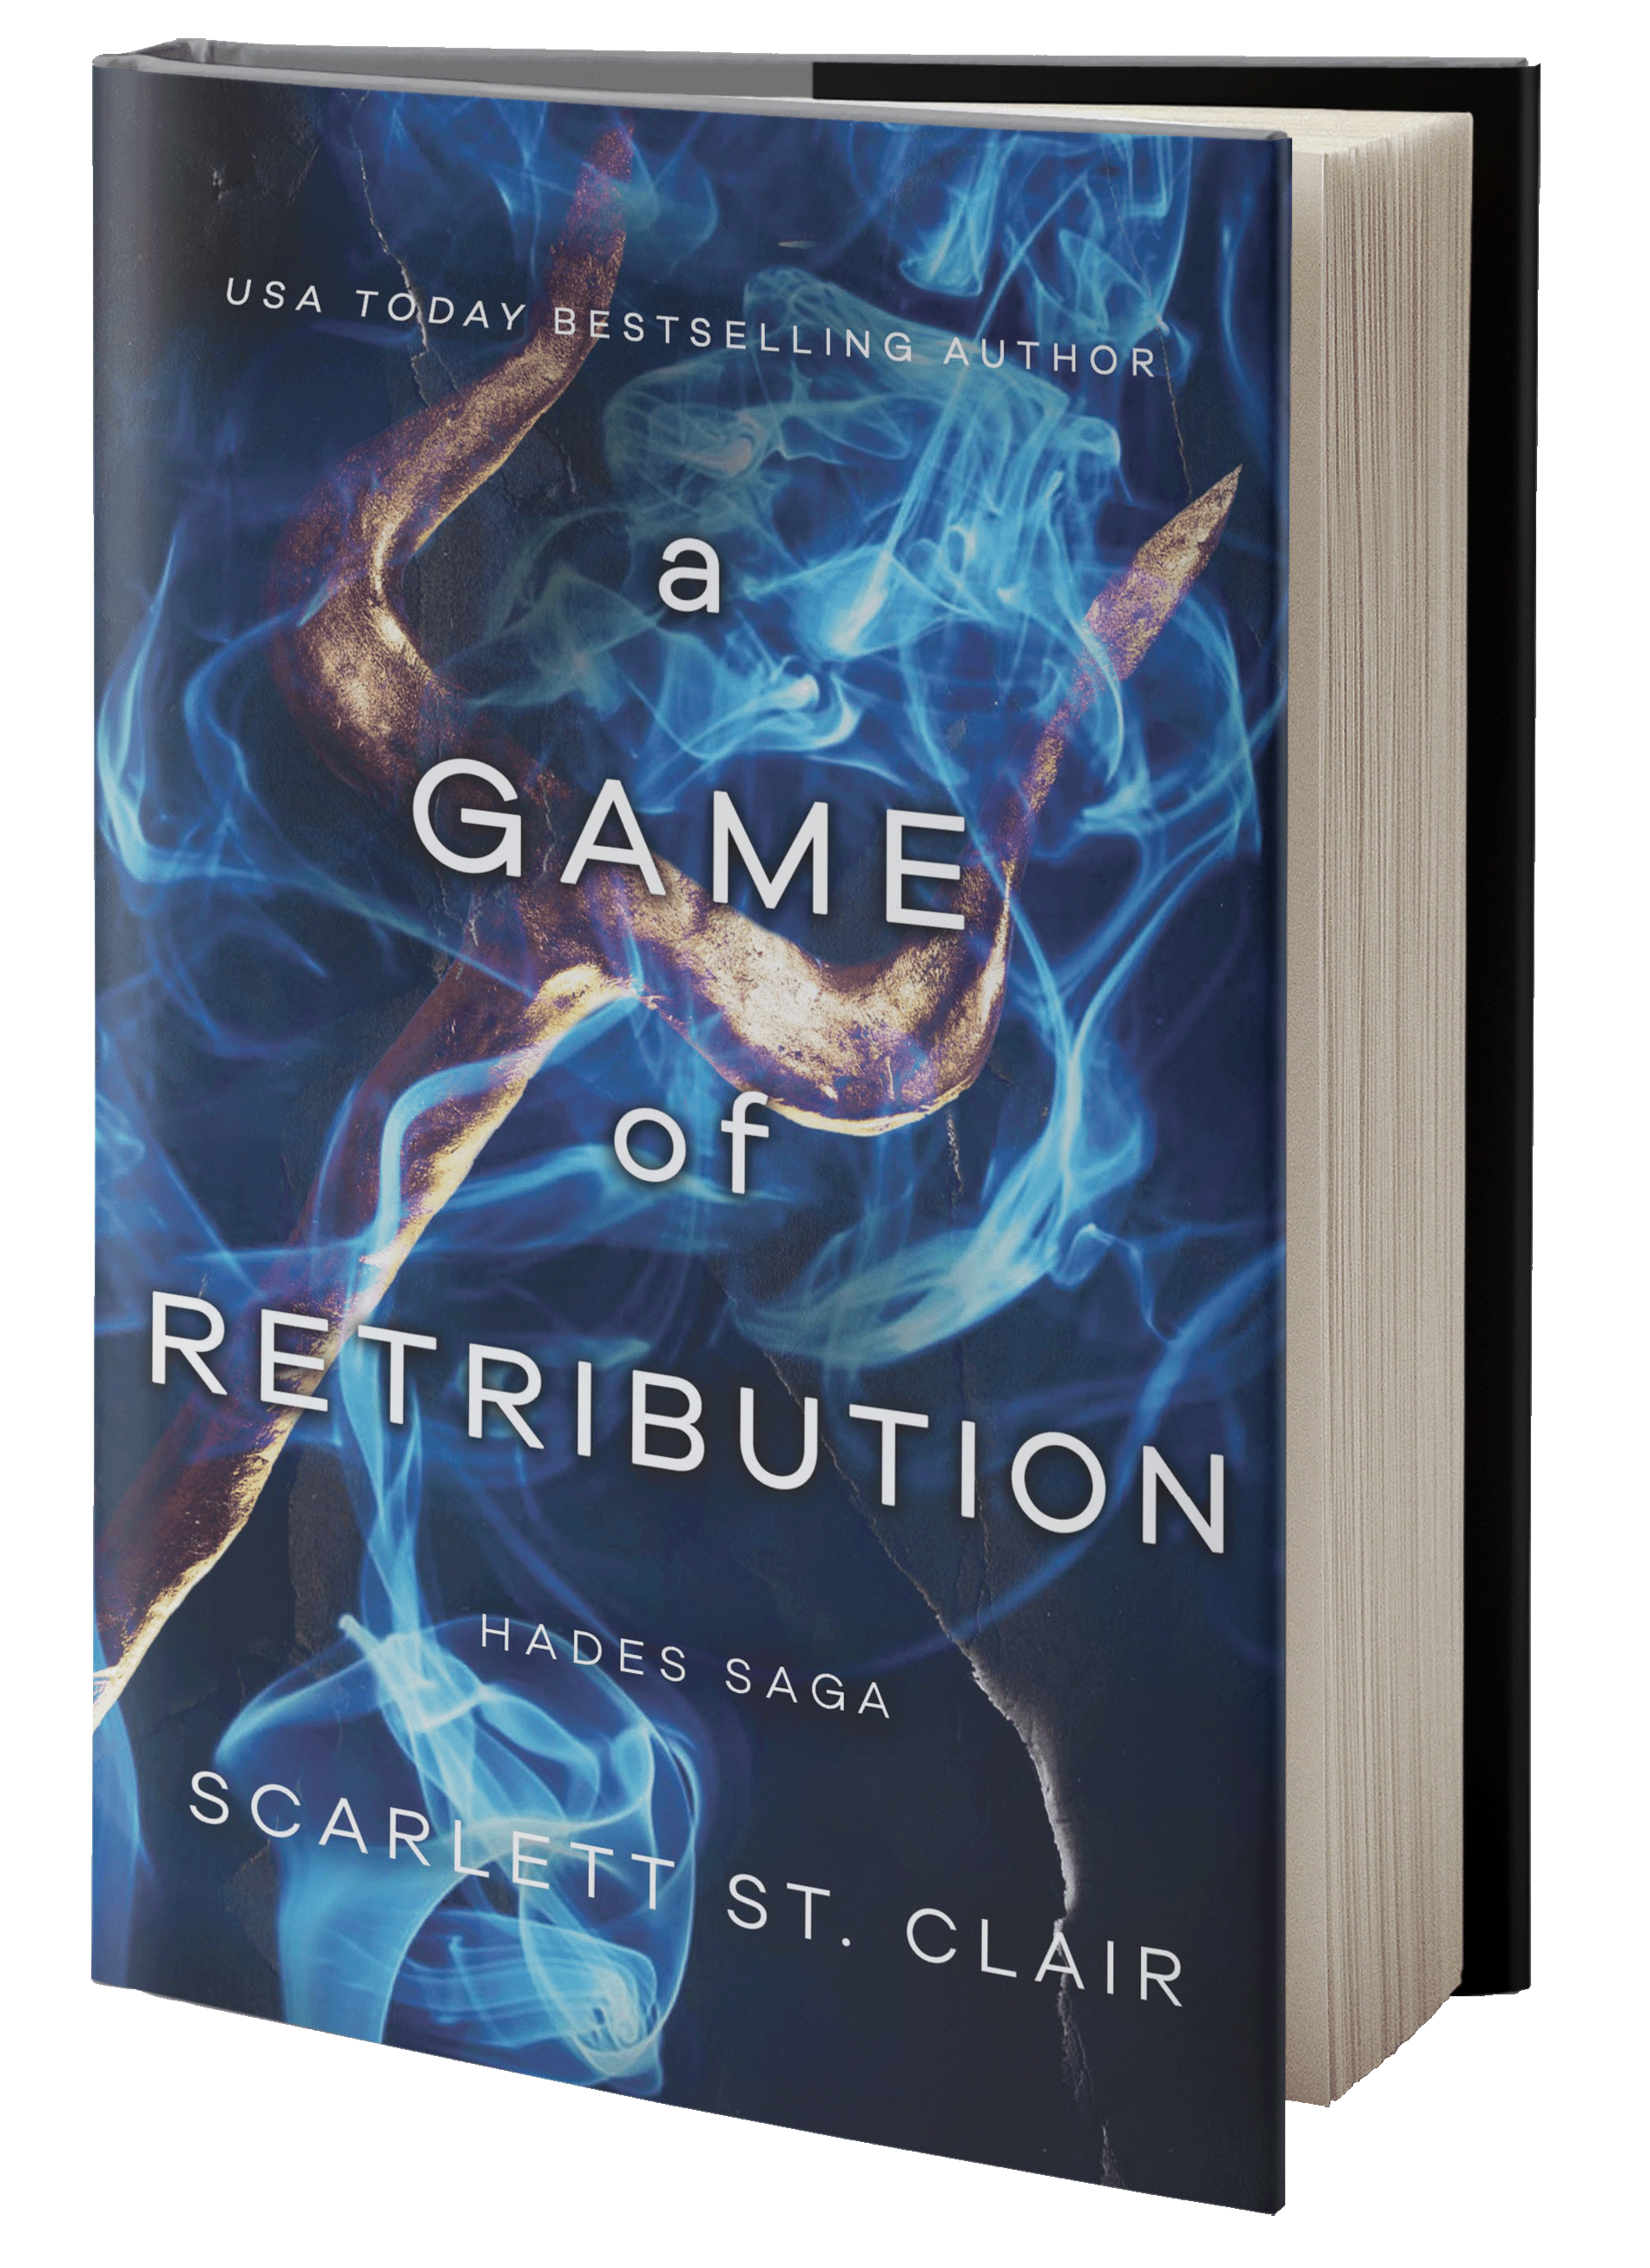 Book cover of "A Game of Retribution"